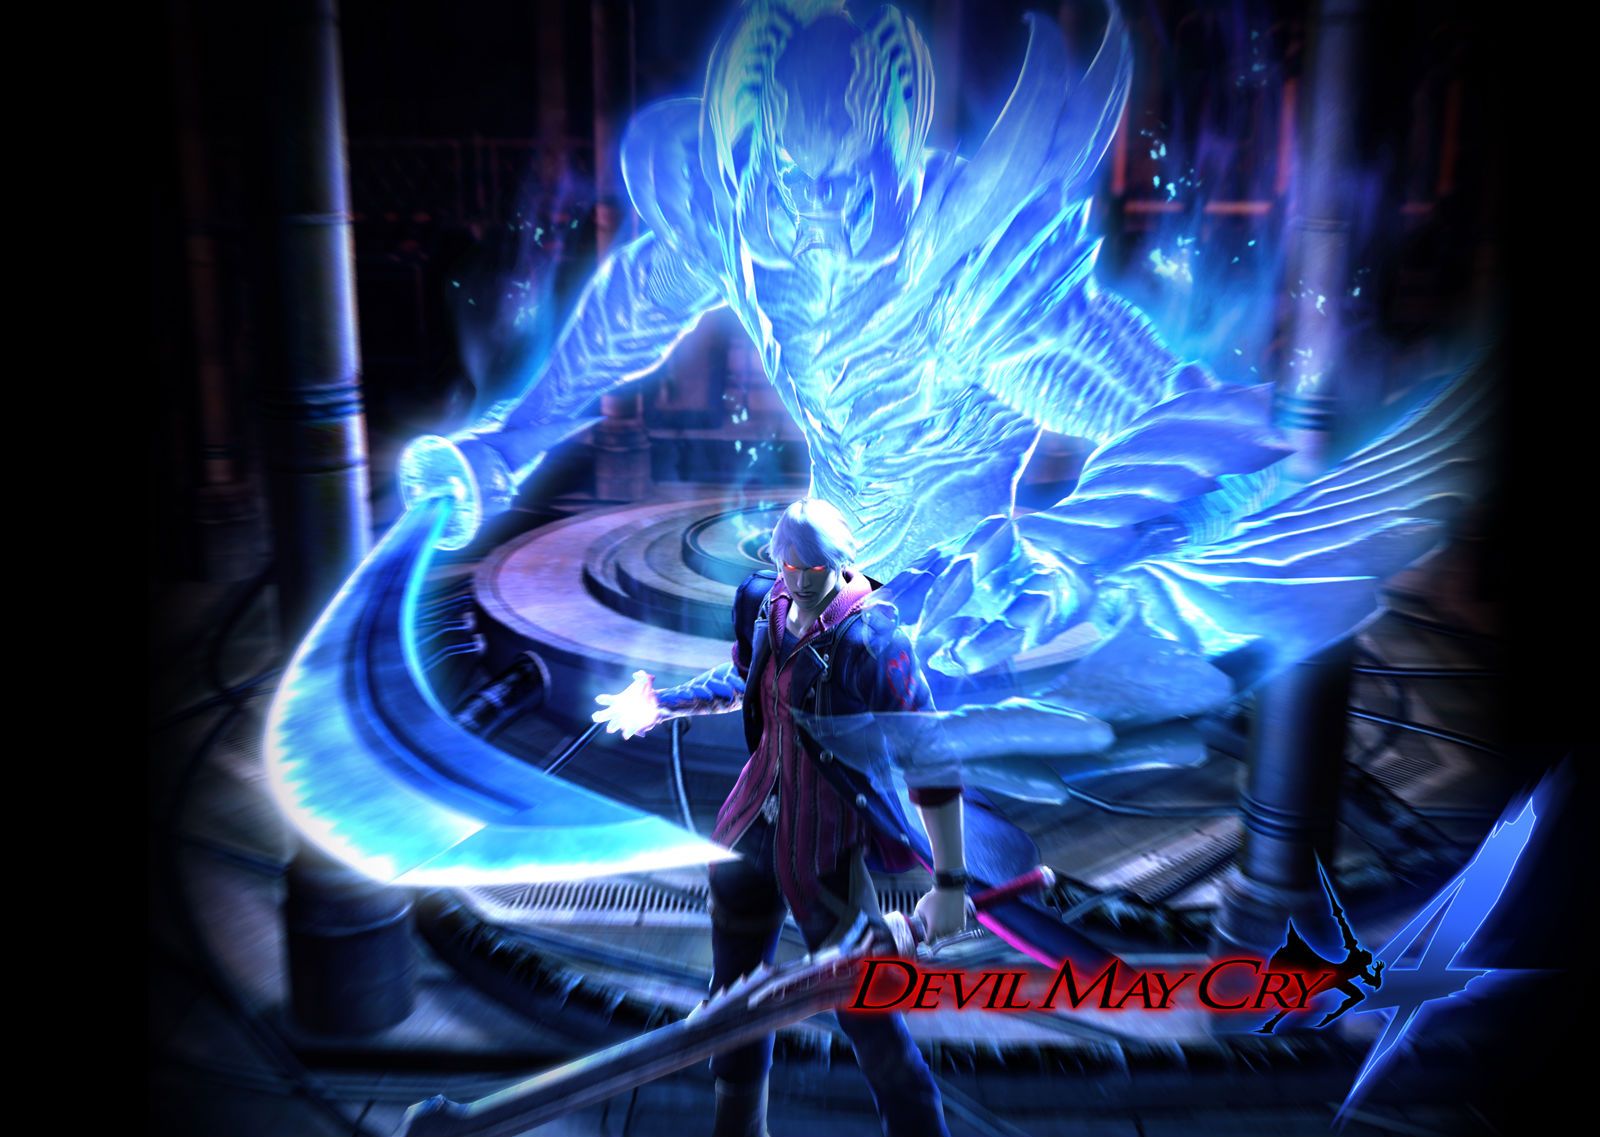 Video Game Devil May Cry 4 Wallpaper:1600x1137